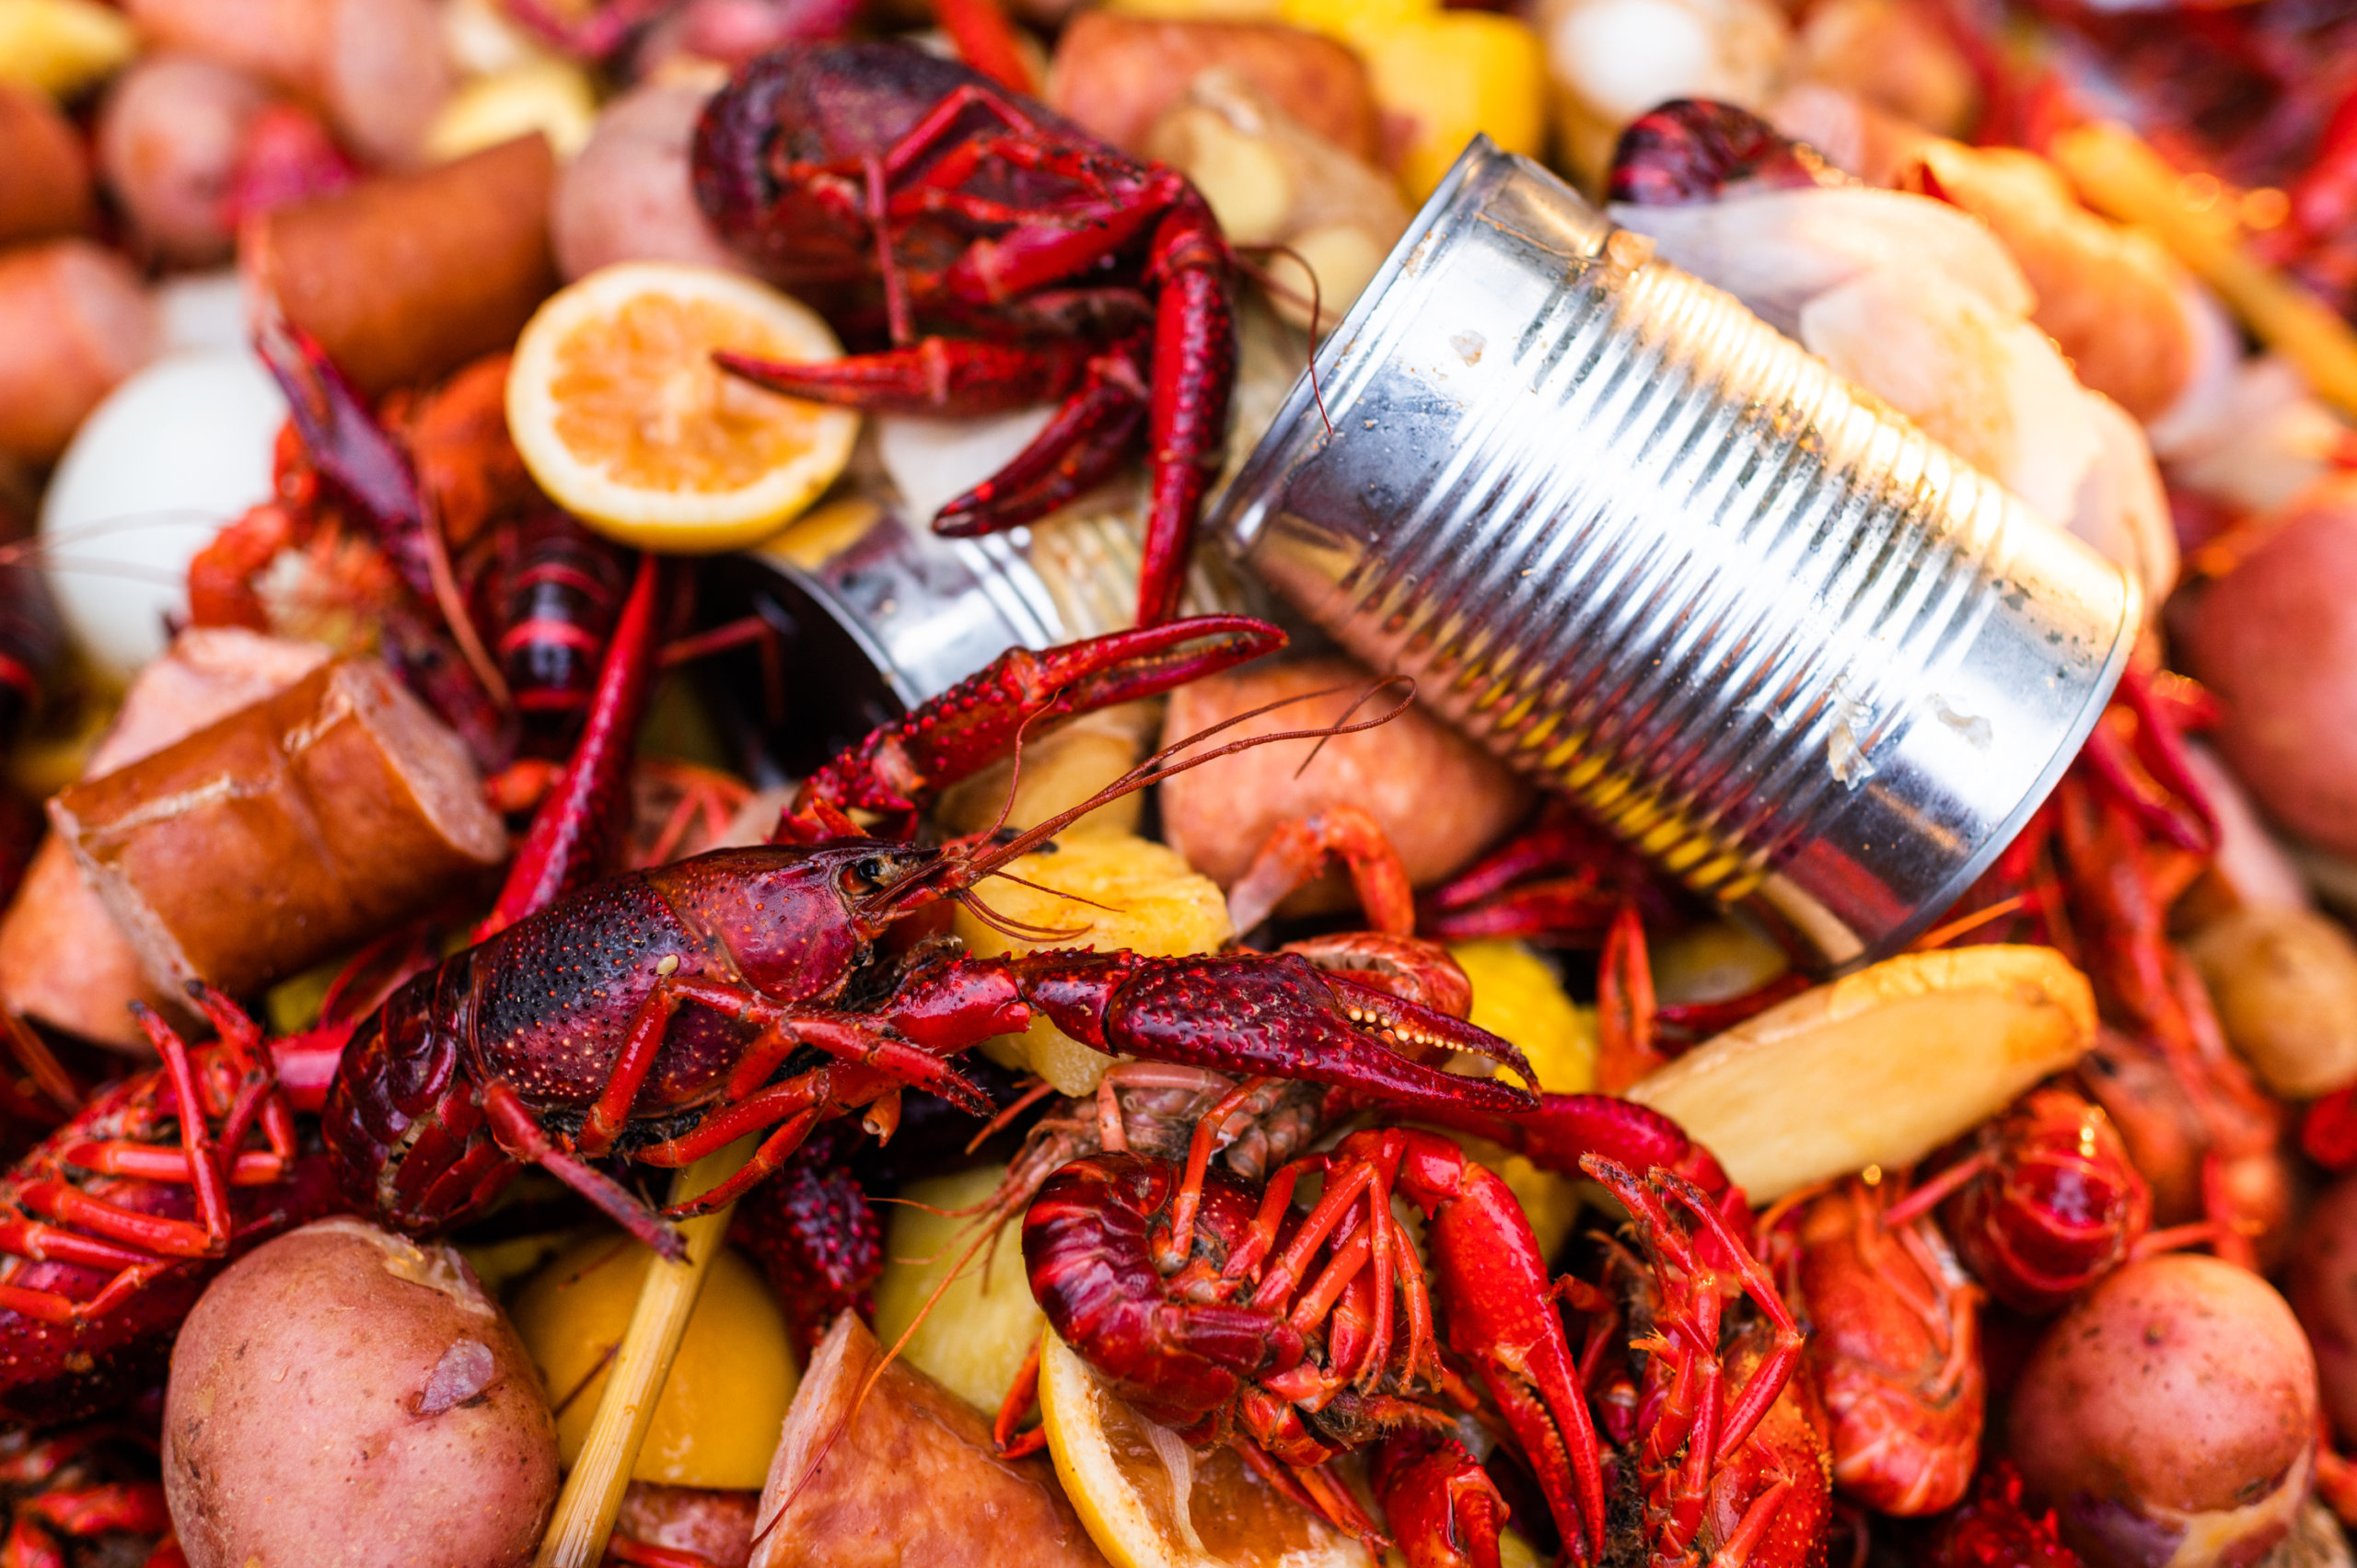 A pile of boiled crawfish with fixins